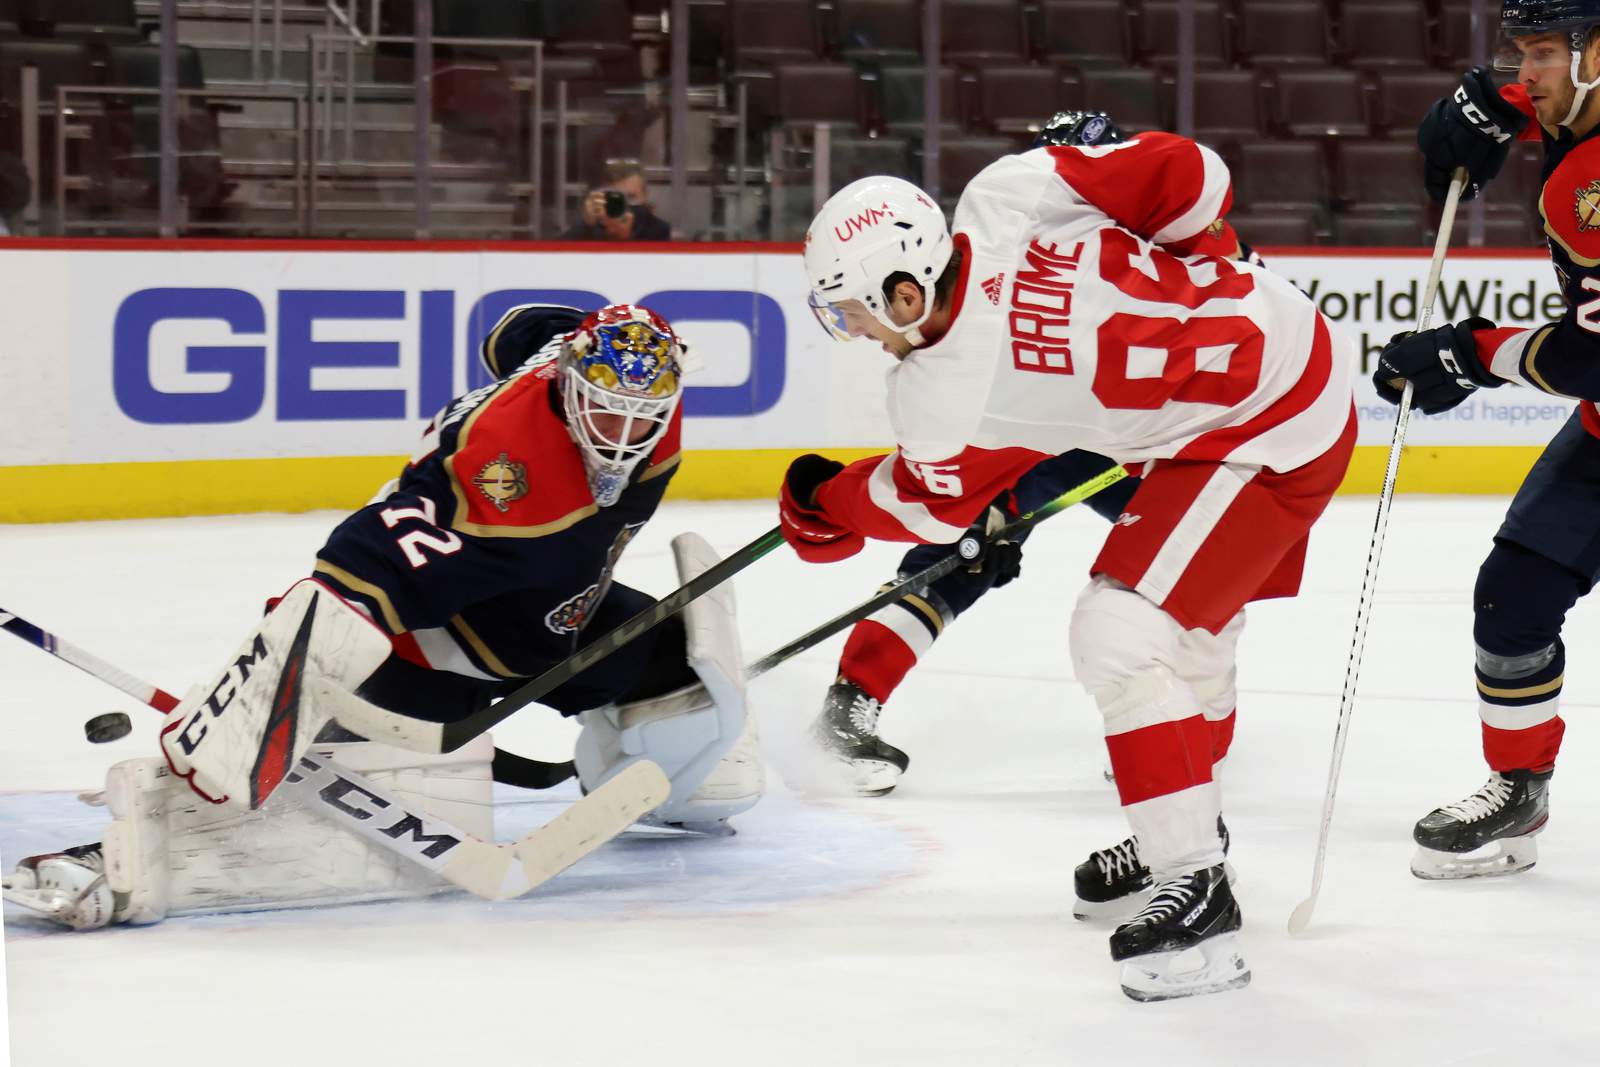 Red Wings hold off Panthers 2-1 after Brome’s 1st NHL goal